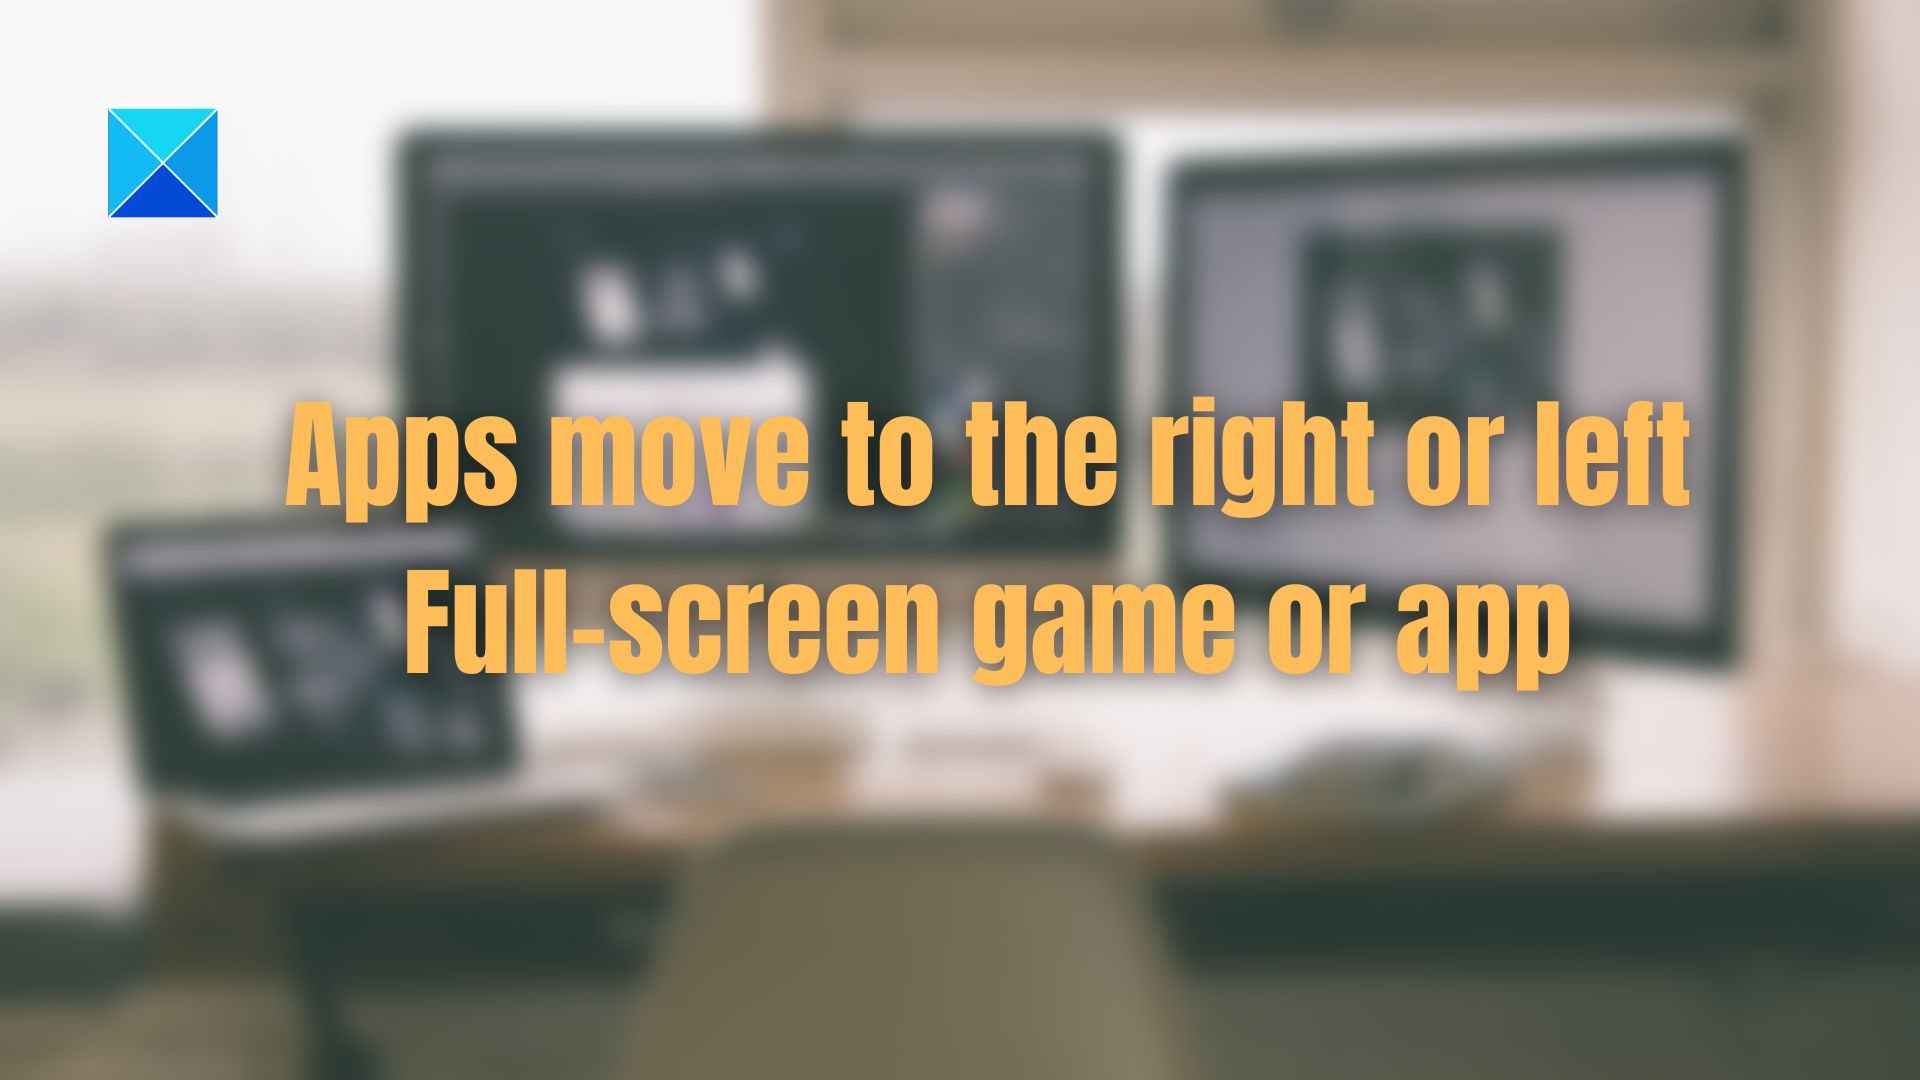 Apps move to the right or left